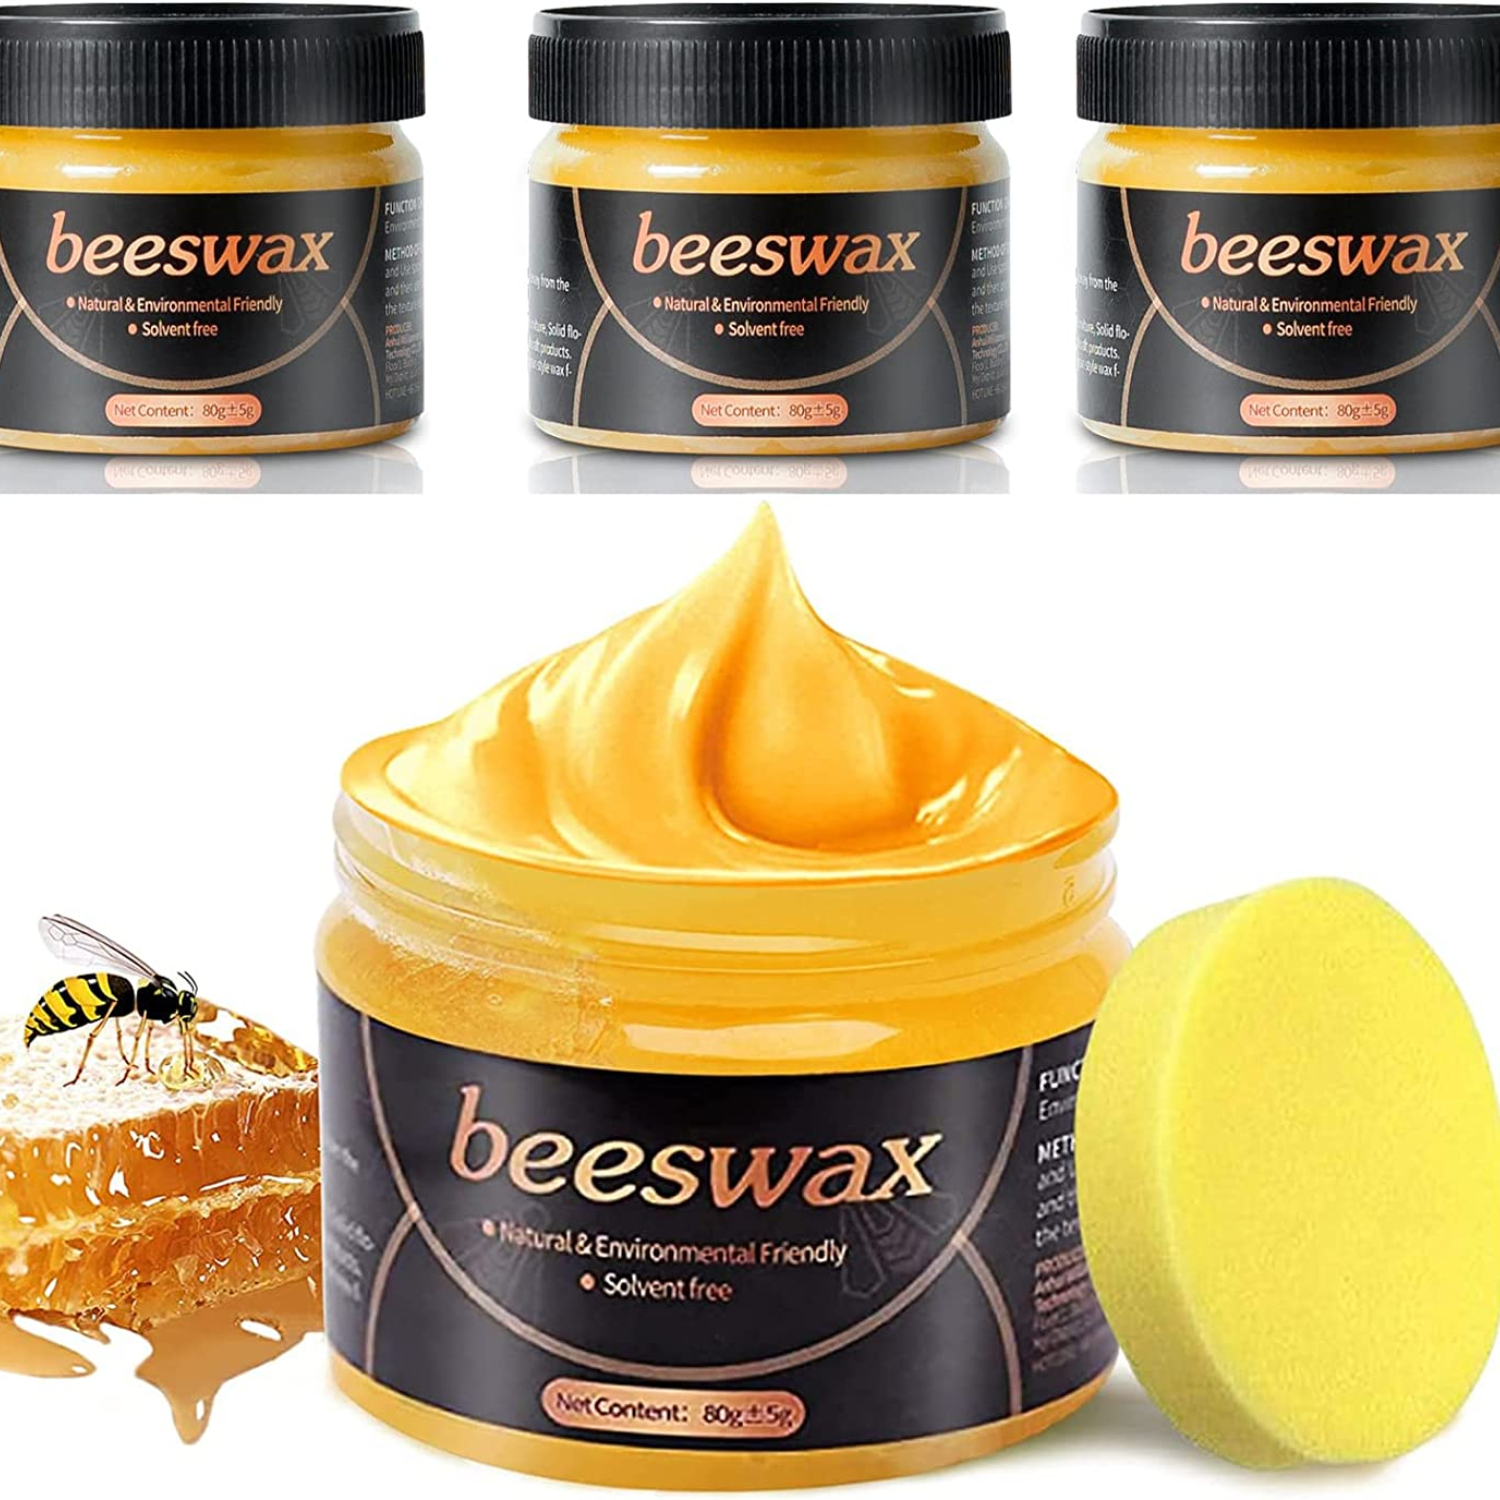 Beeswax Wood Finish and Furniture Polish: Always Been the Best